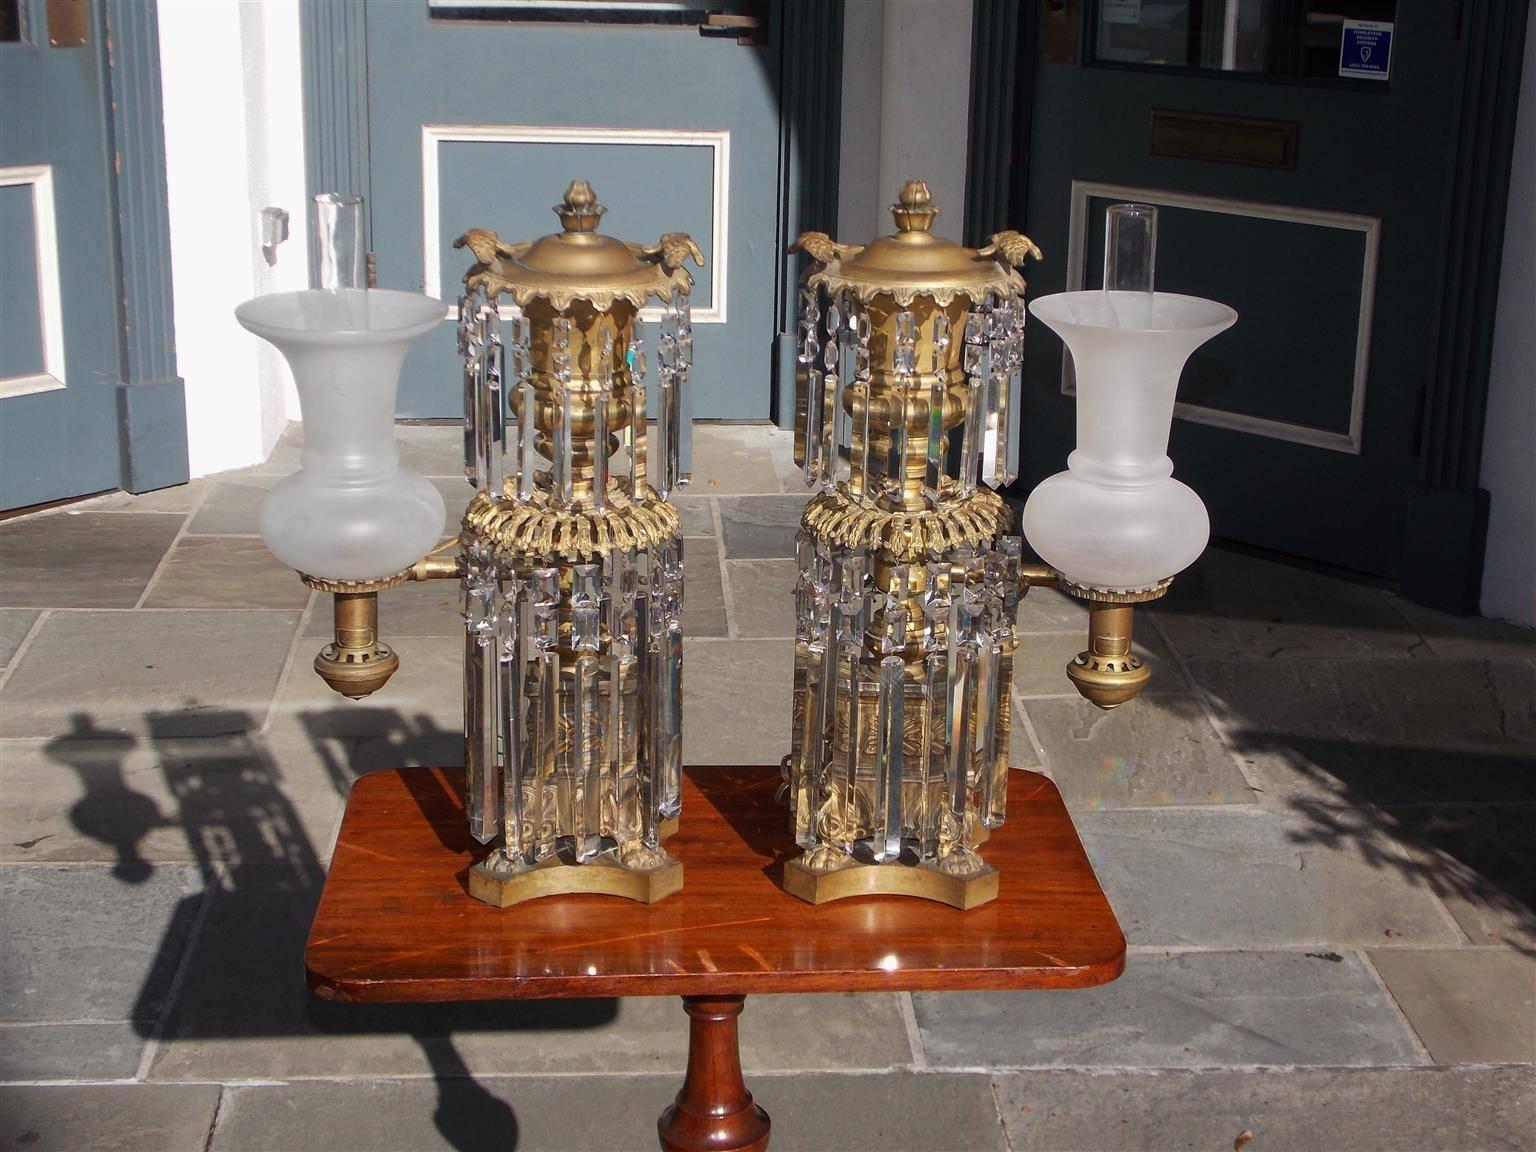 Pair of American gilt bronze and crystal Argand lamps with a centered urn a top columns, each with flanking single arms, foliate-edged rings with bird motif, lotus finial, matching frosted glass shades with cylindrical glass chimneys, and resting on